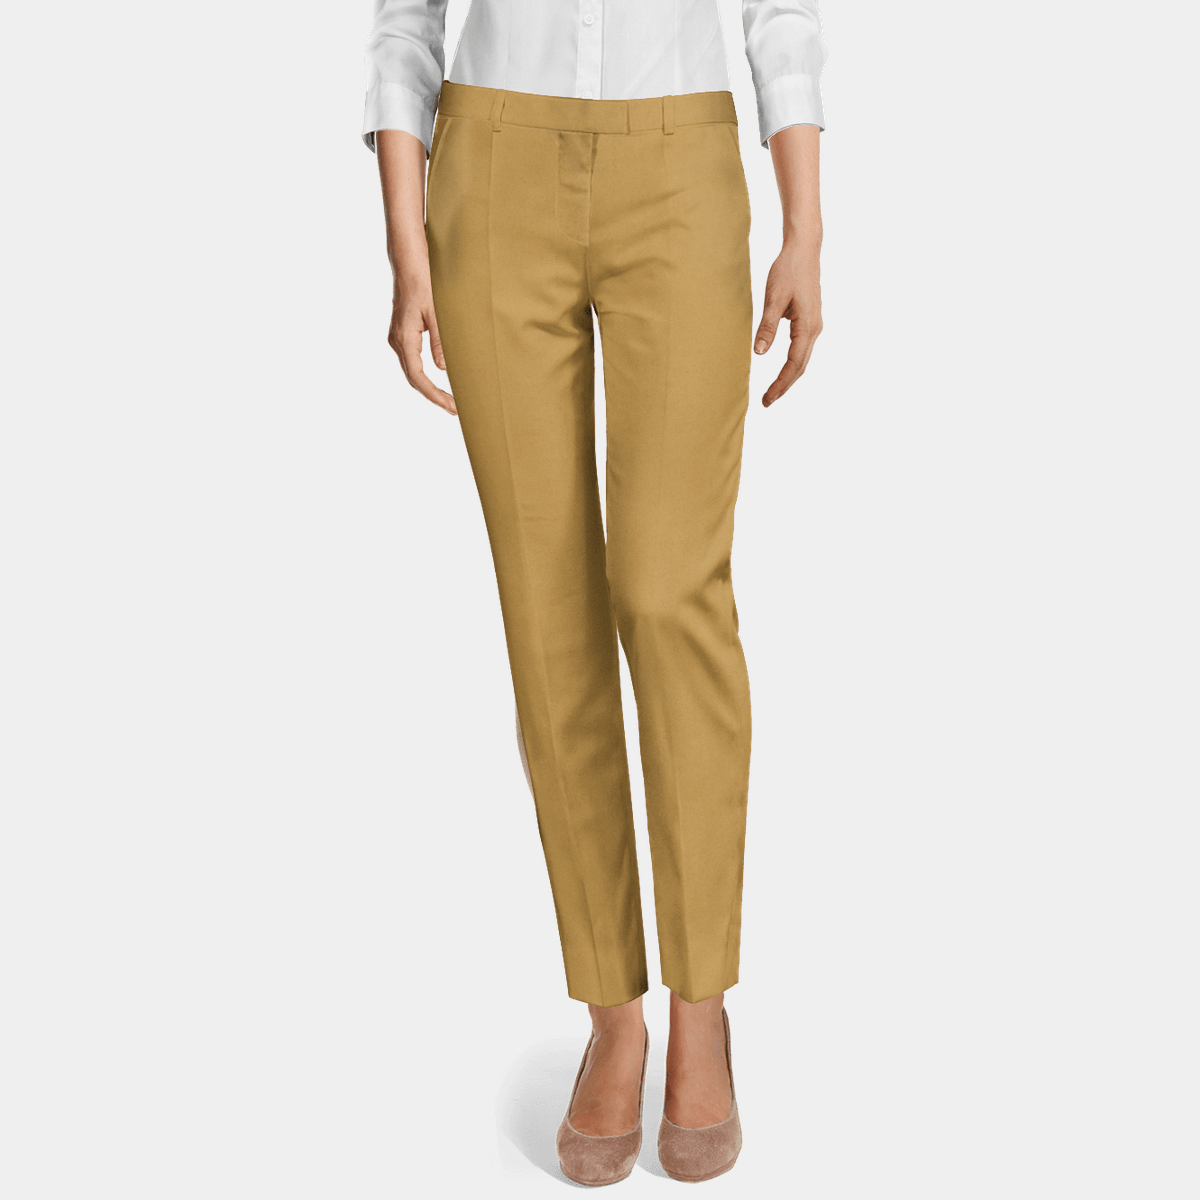 Camel Flat Front Cigarette Pants 99 Sumissura